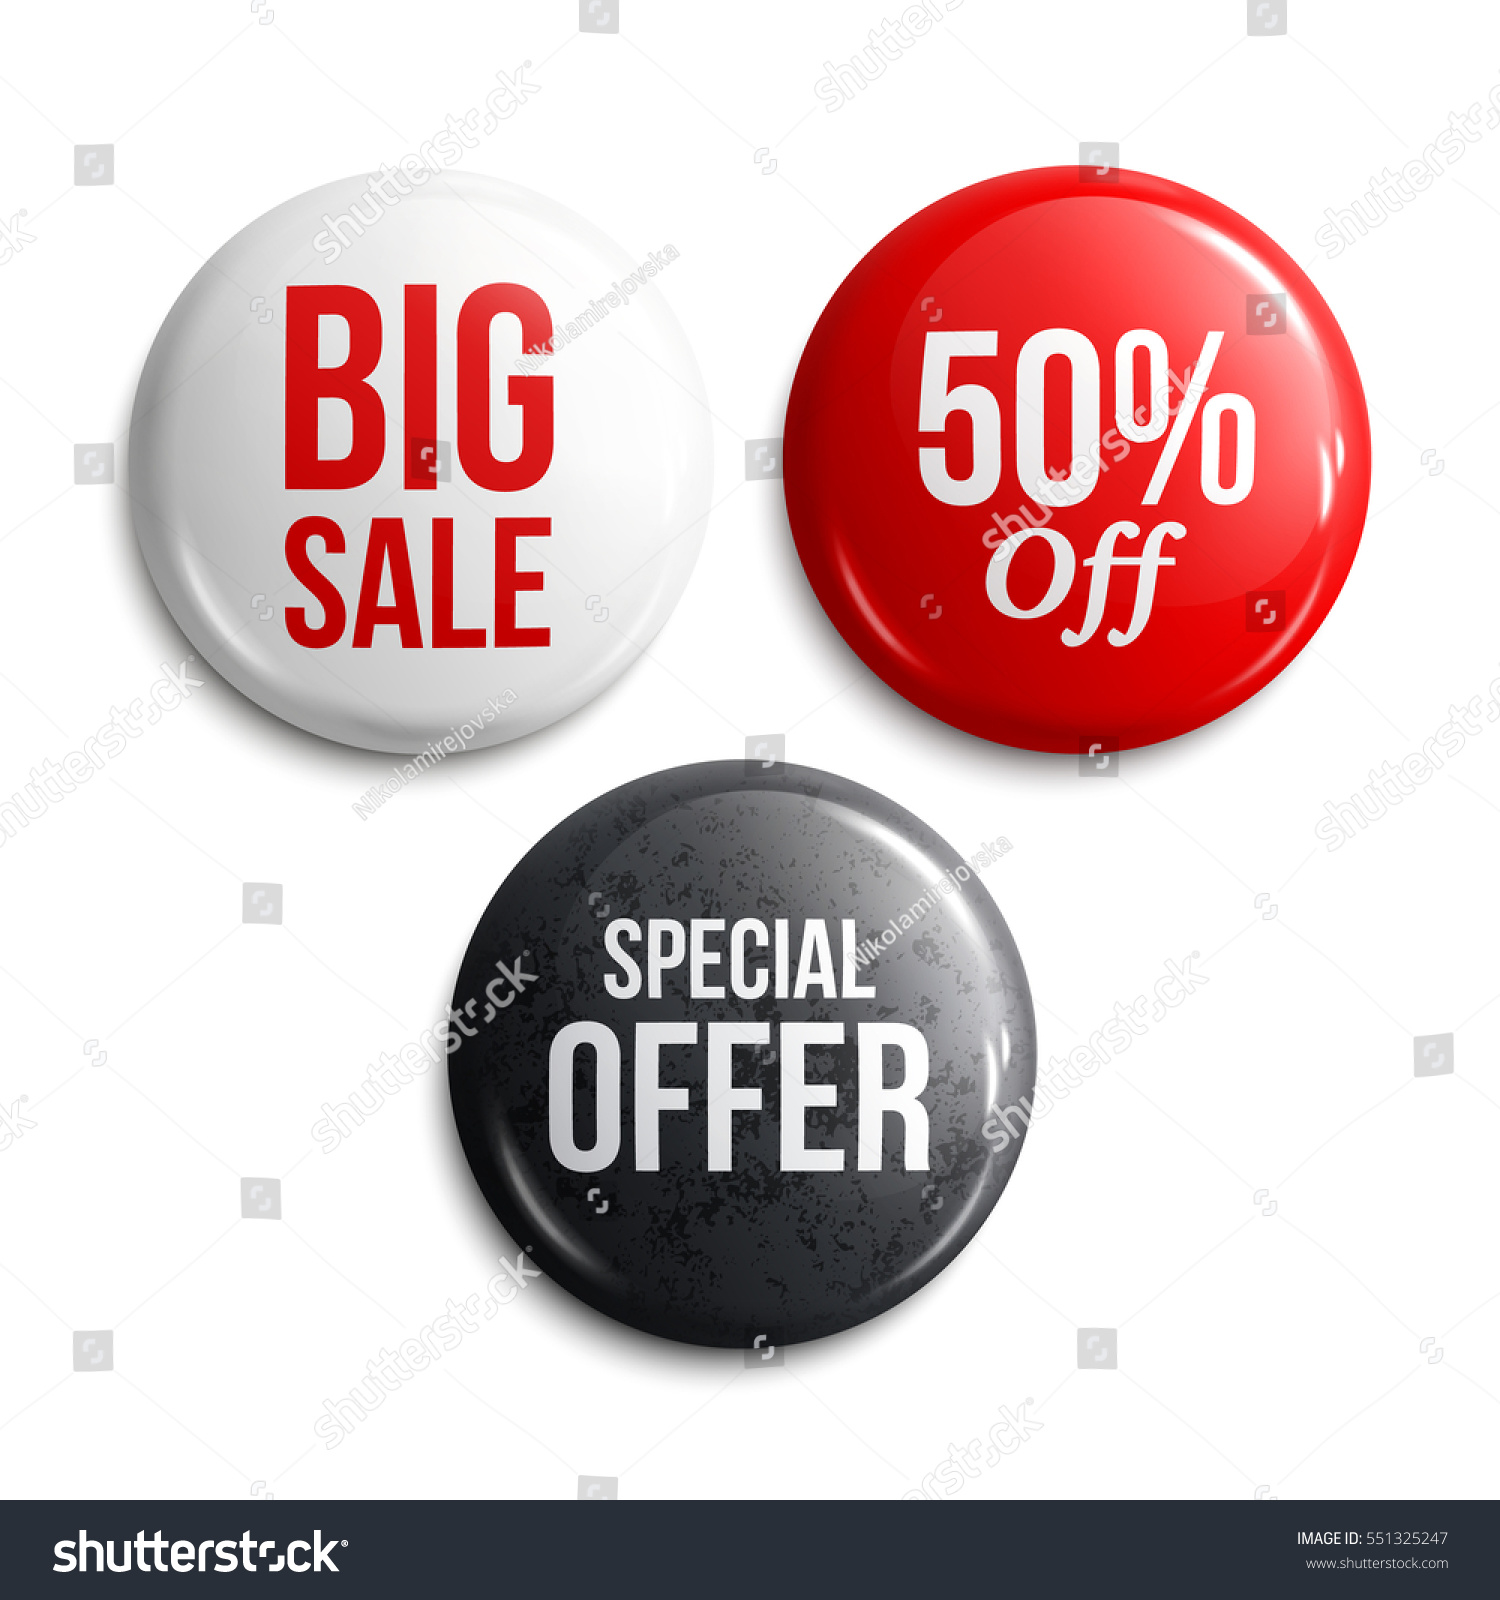 Set of glossy sale buttons or badges. Product promotions. Big sale, special offer, 50% off. Vector. #551325247